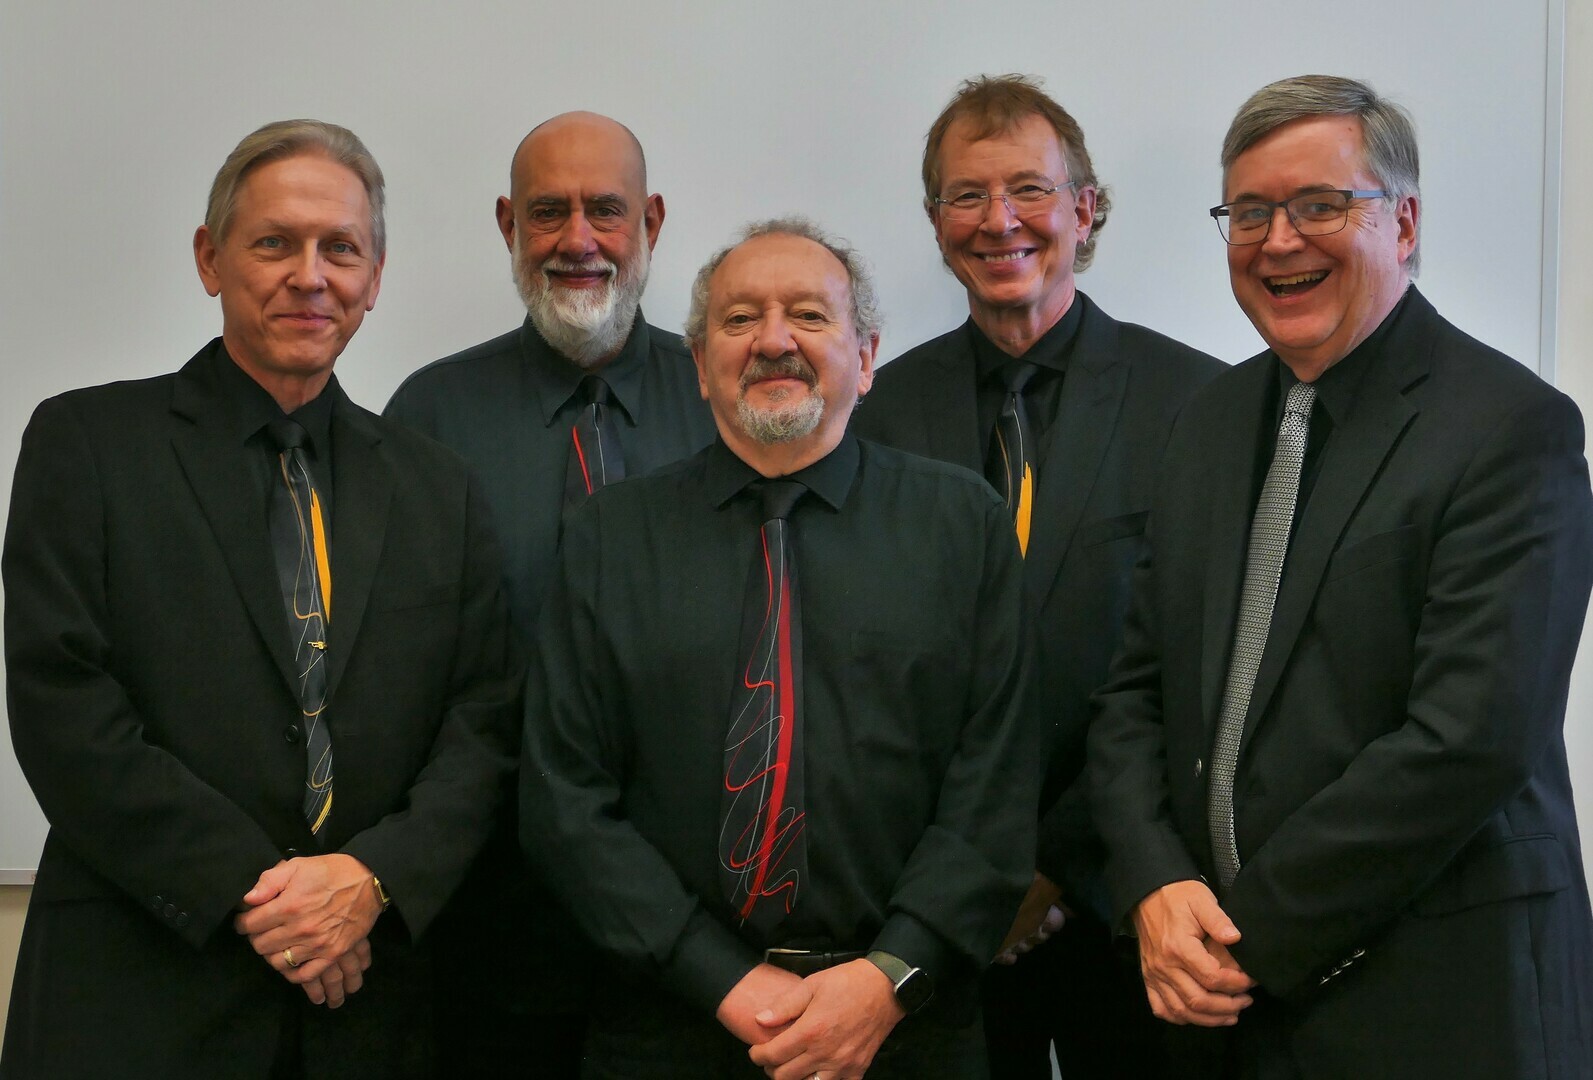 Presbybop to offer Jazz Vespers at First Baptist Church in America Saturday December 9 4 pm Free, Providence, Rhode Island, United States